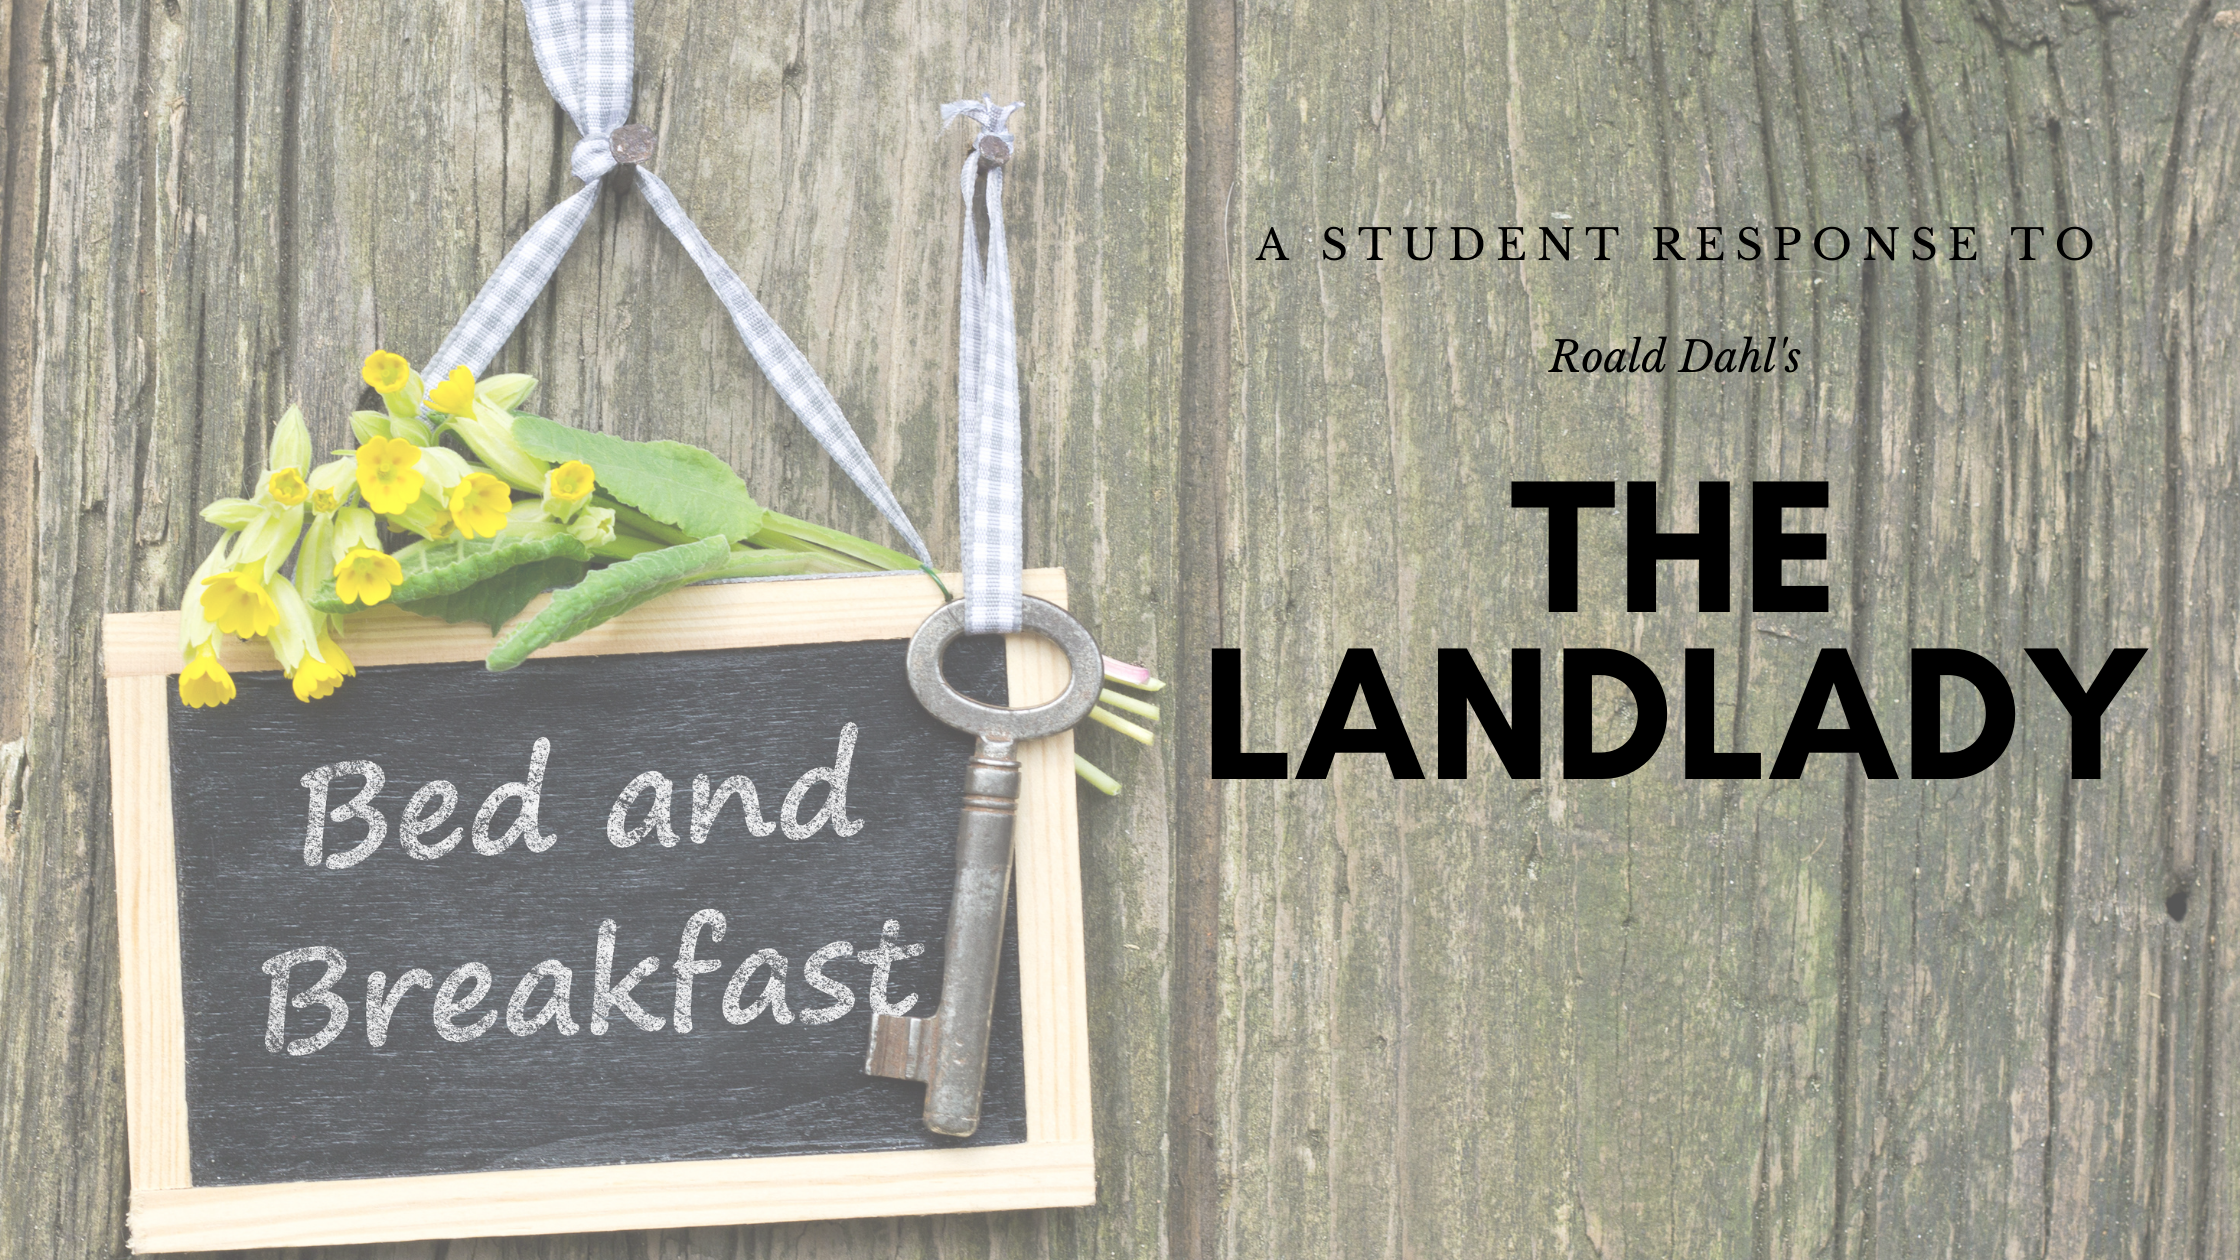 You are currently viewing Student Response to “The Landlady” in 2020